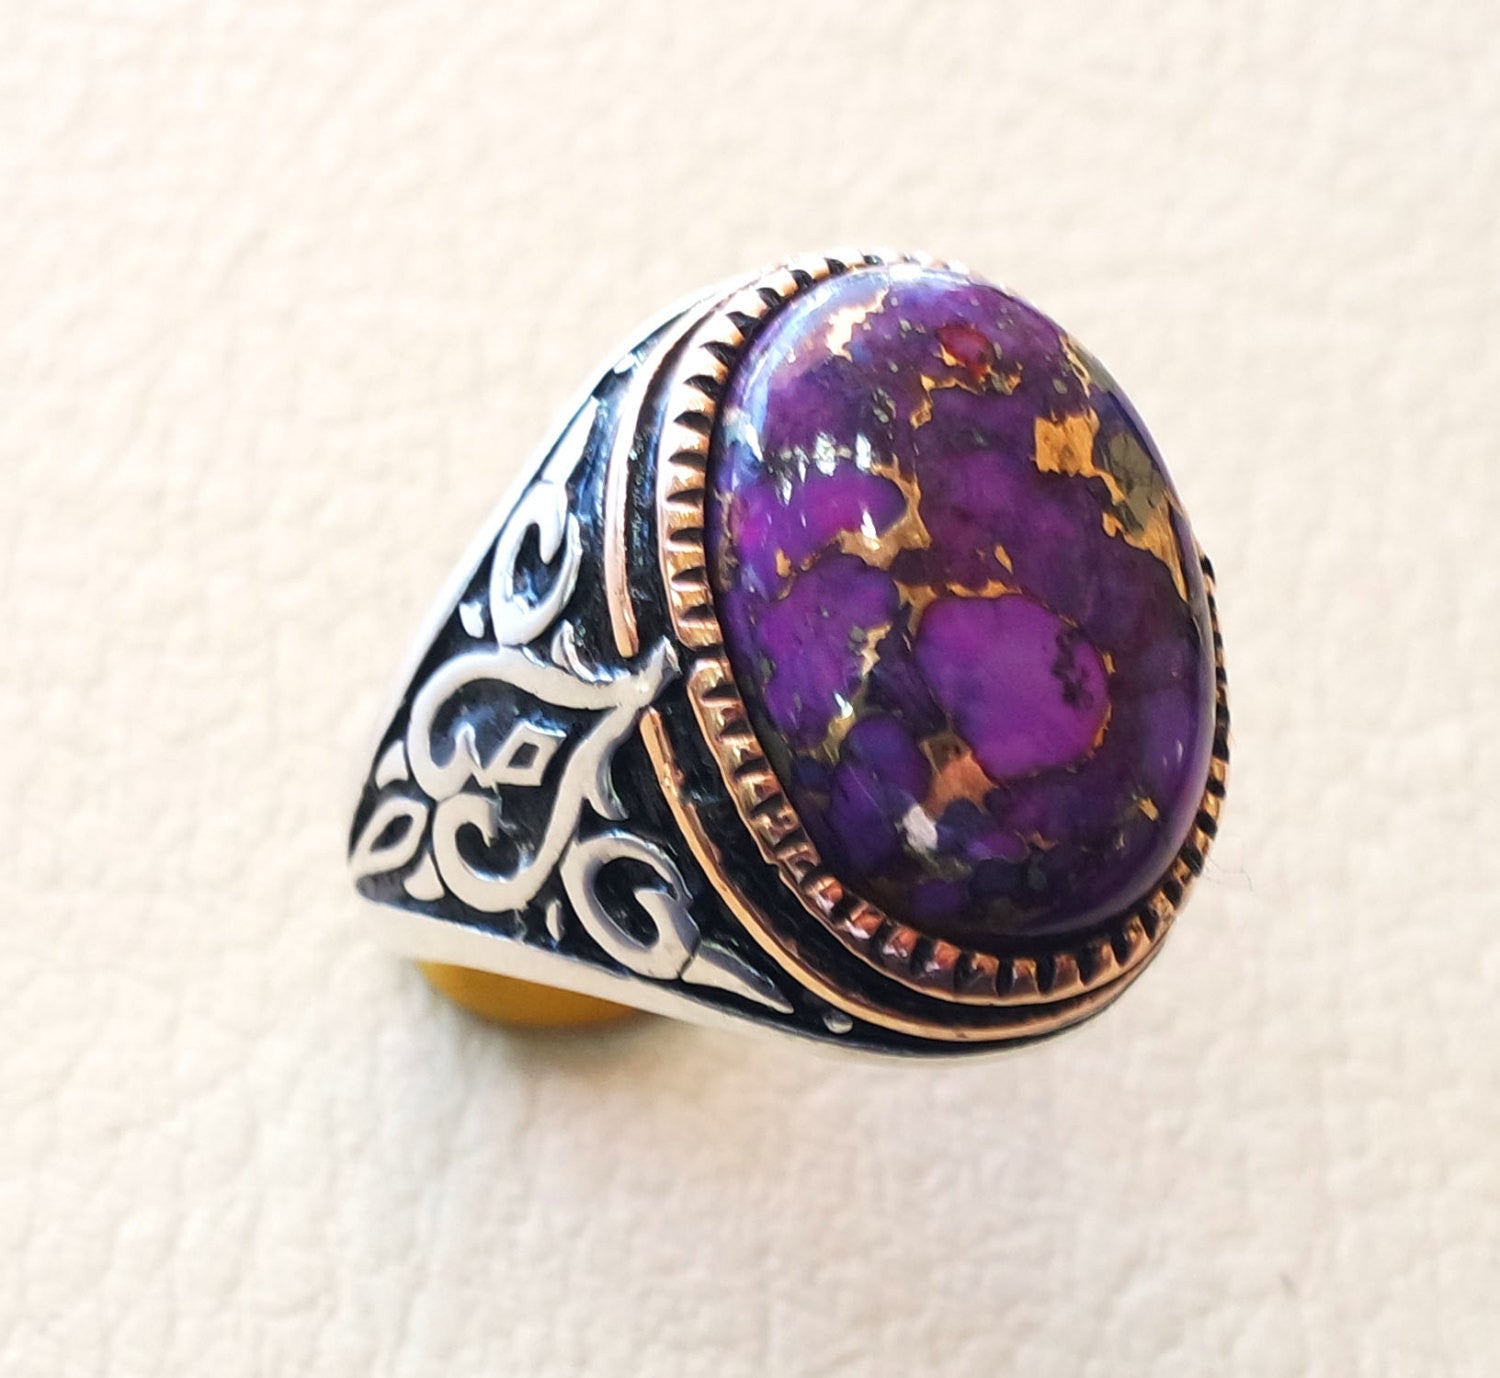 ottoman style heavy ring men sterling silver 925 jewelry copper purple turquoise high quality semi precious natural stone in bronze frame